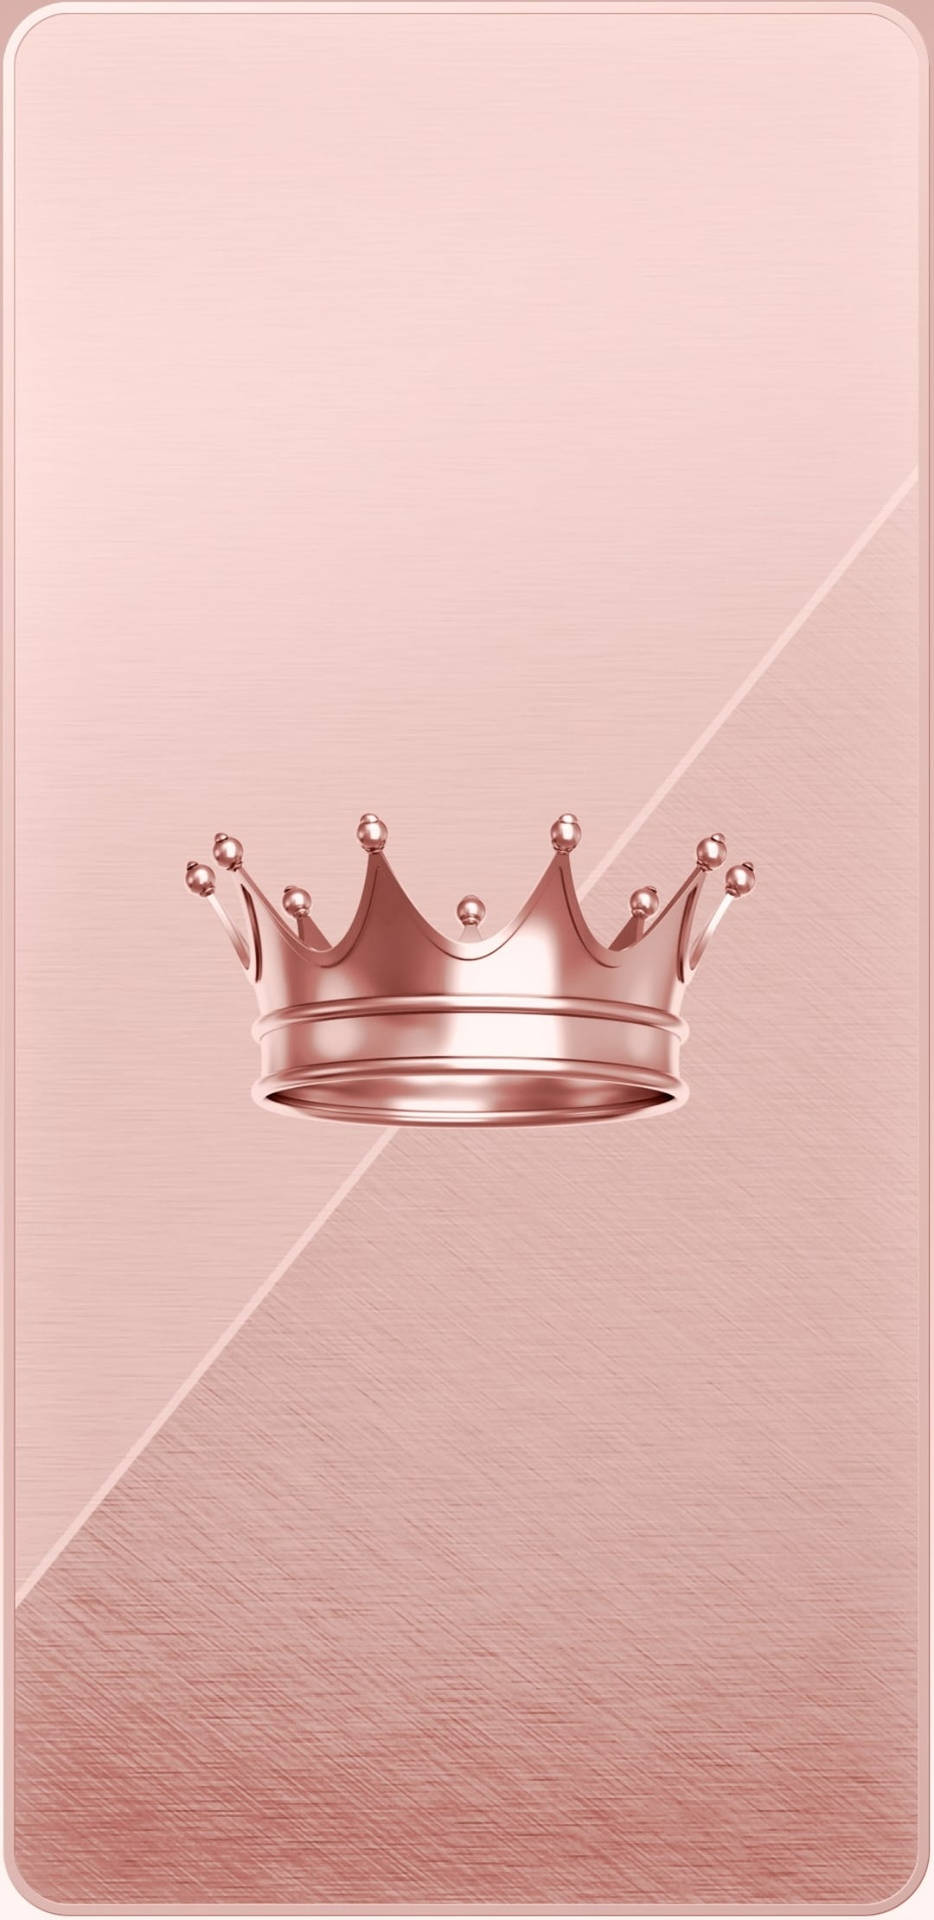 Dronning Girly Rose Gold Crown Wallpaper